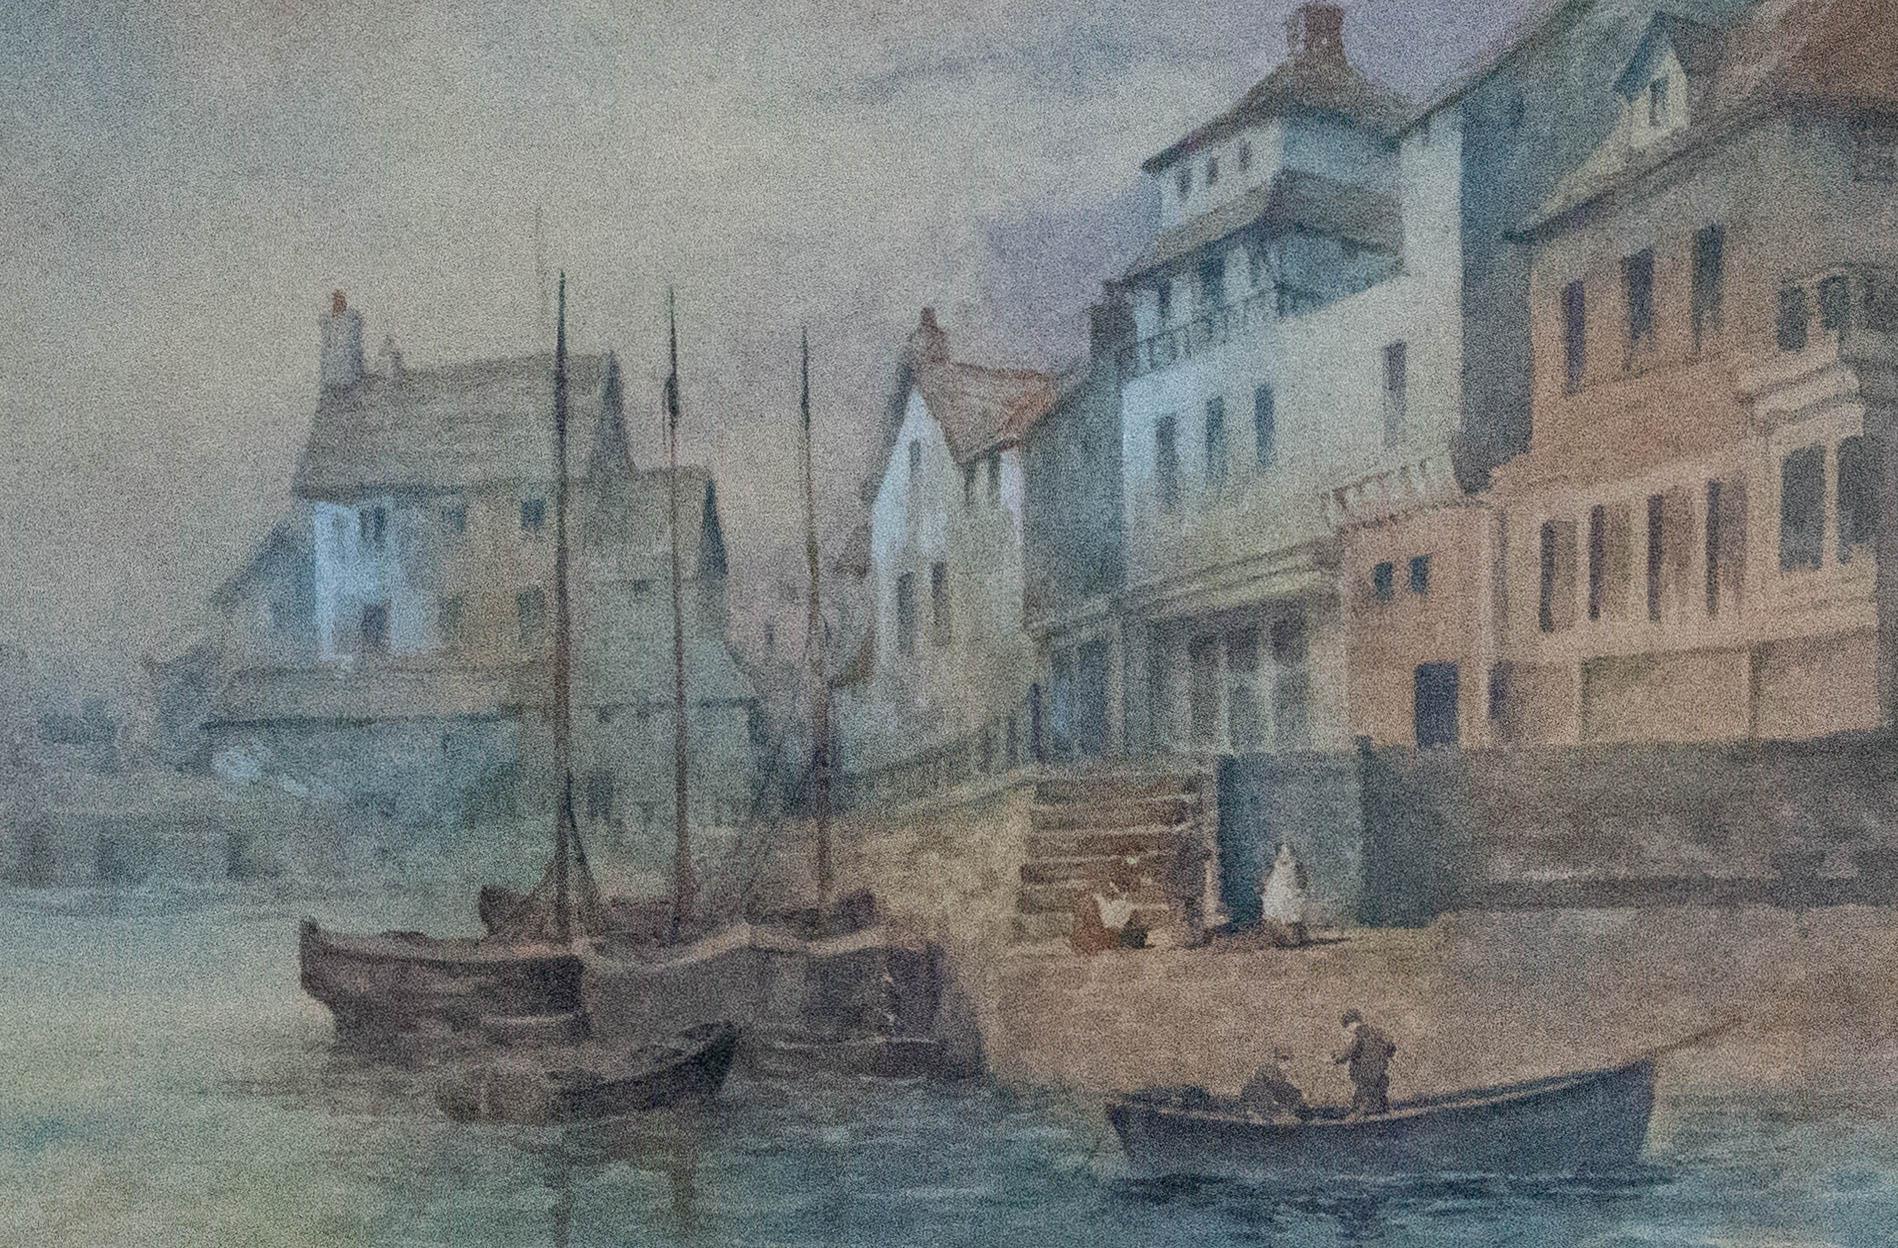 A fine watercolour showing a coastal harbour town under a grey sky. The artist has wonderfully captured the flat light of a grey day at the coast. Figures can be seen at the dockside. The artist has initialed in the lower left corner and the